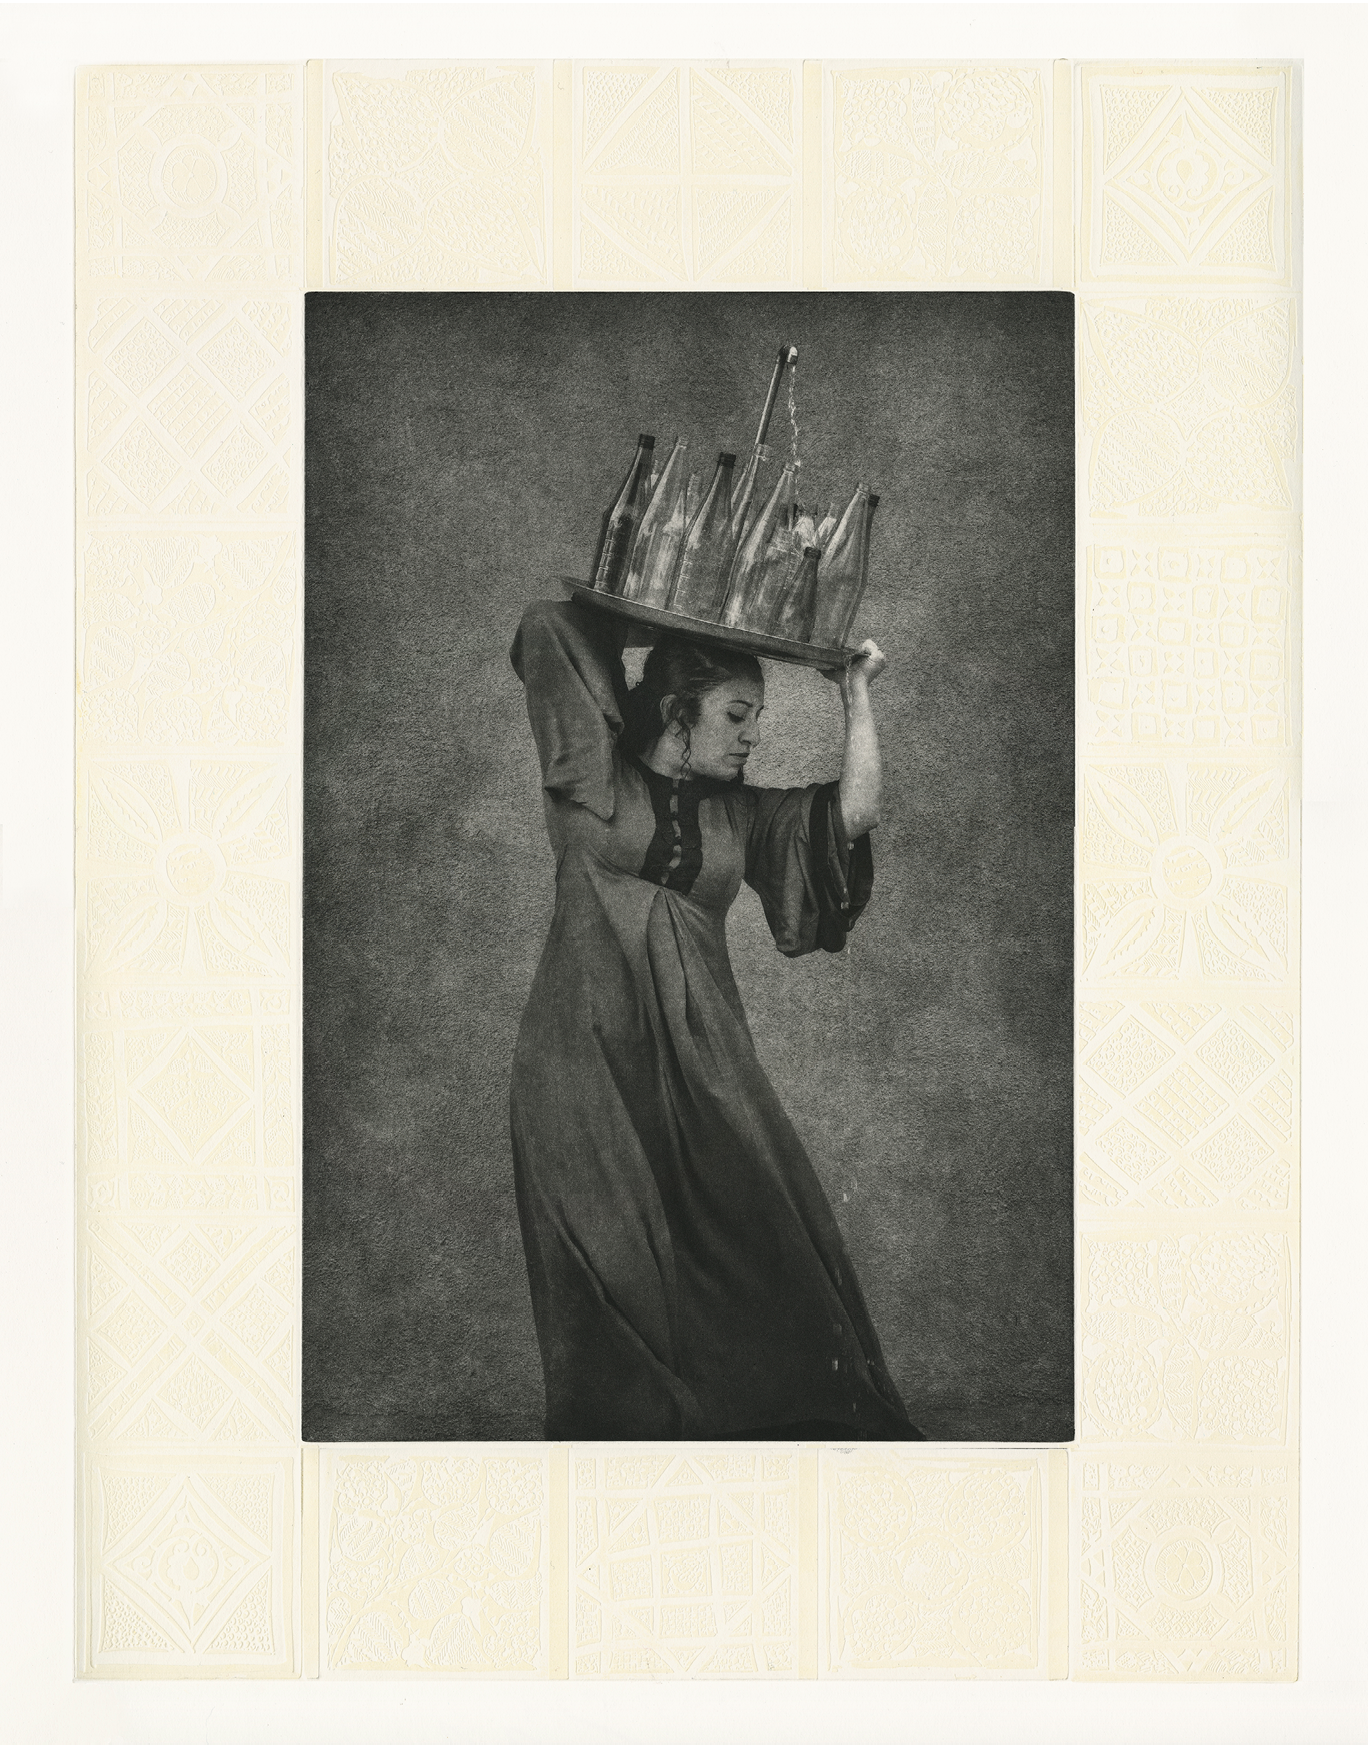 Black and white photographic portrait of a woman in profile view wearing a flowing dress. She is wearing a dress, and carrying a large tray with many glass bottles on top of her head. At the center of the tray is a water spout, with water flowing out and over the bottles towards the ground. The image is framed with an embossed decorative design.